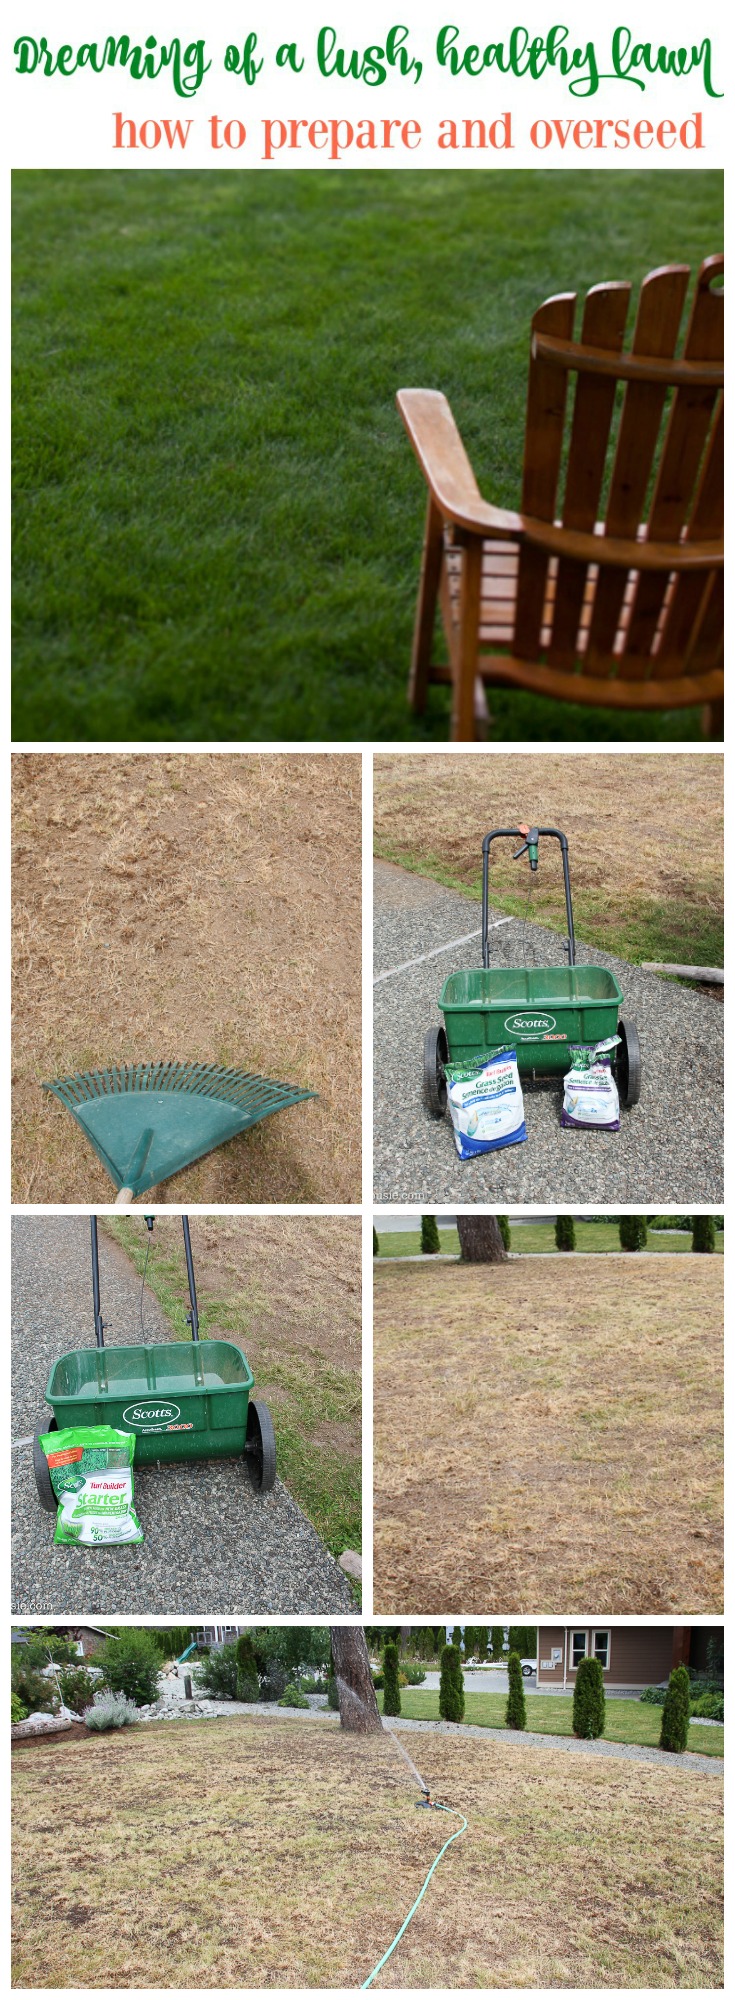 A green lawn, with a wooden chair, a rake, seeds and watering.